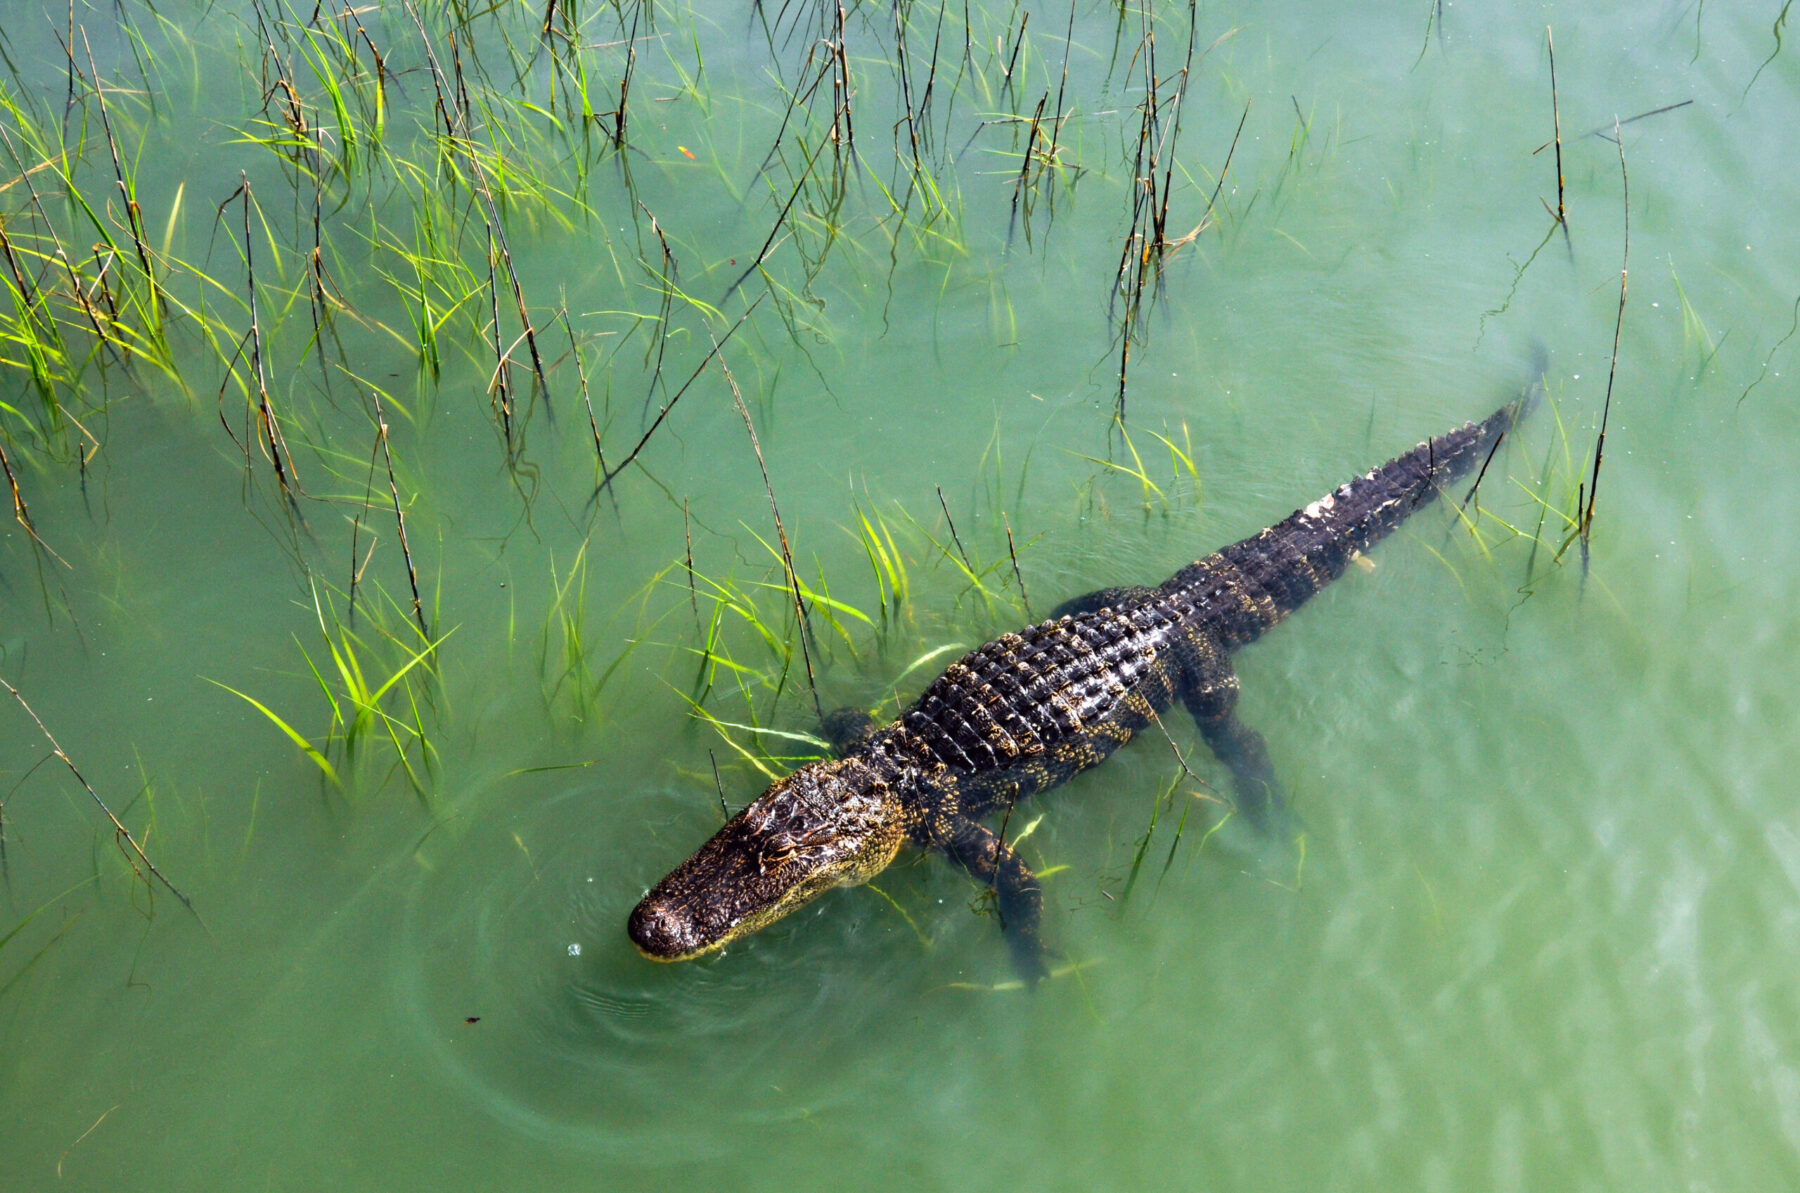 Alligator attacks in the Southeast are on the rise.